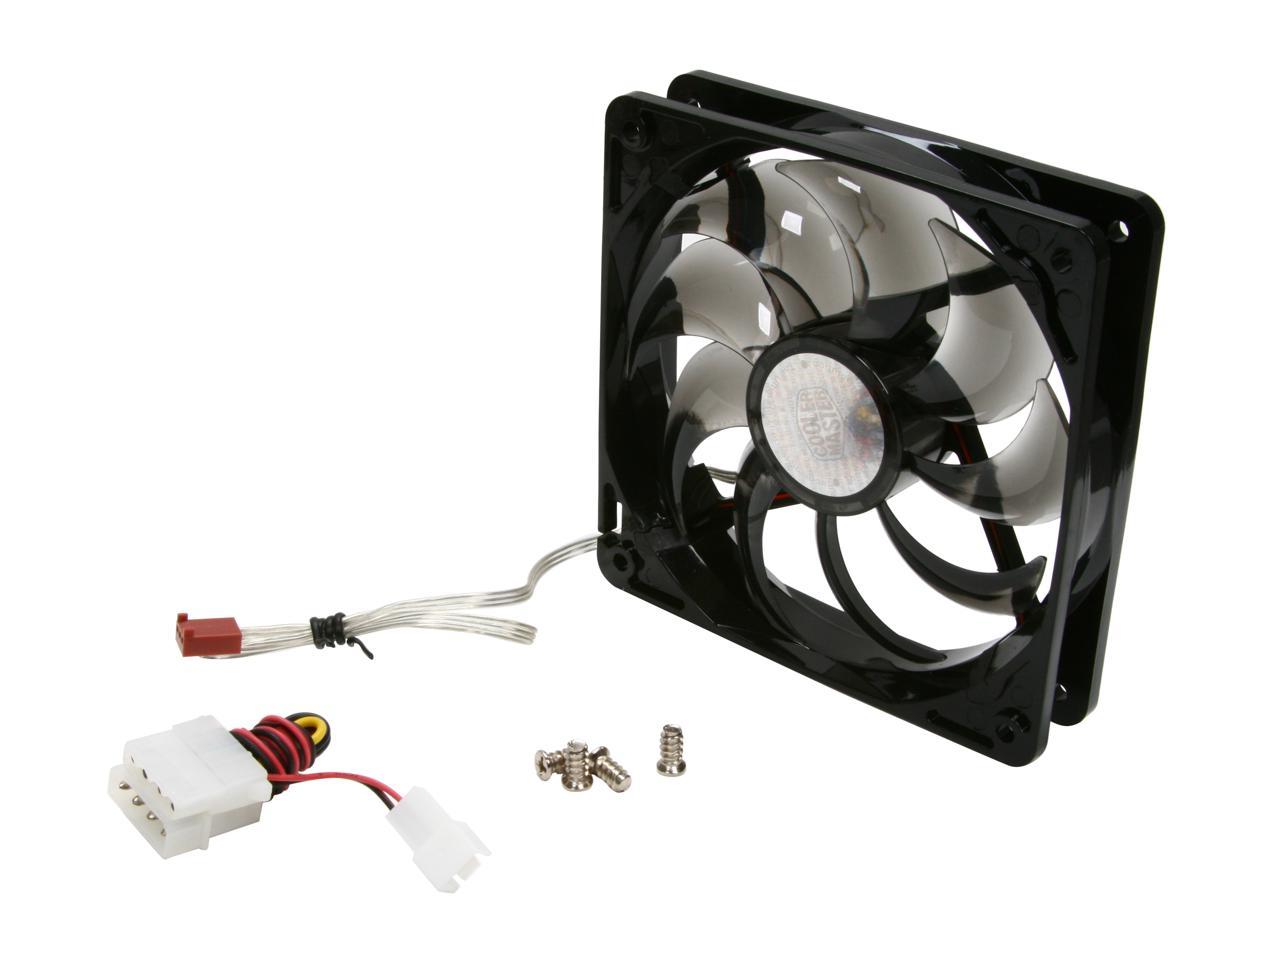 Cooler Master SickleFlow 120 - Sleeve Bearing 120mm Red LED Silent Fan for Computer Cases, CPU Coolers, and Radiators